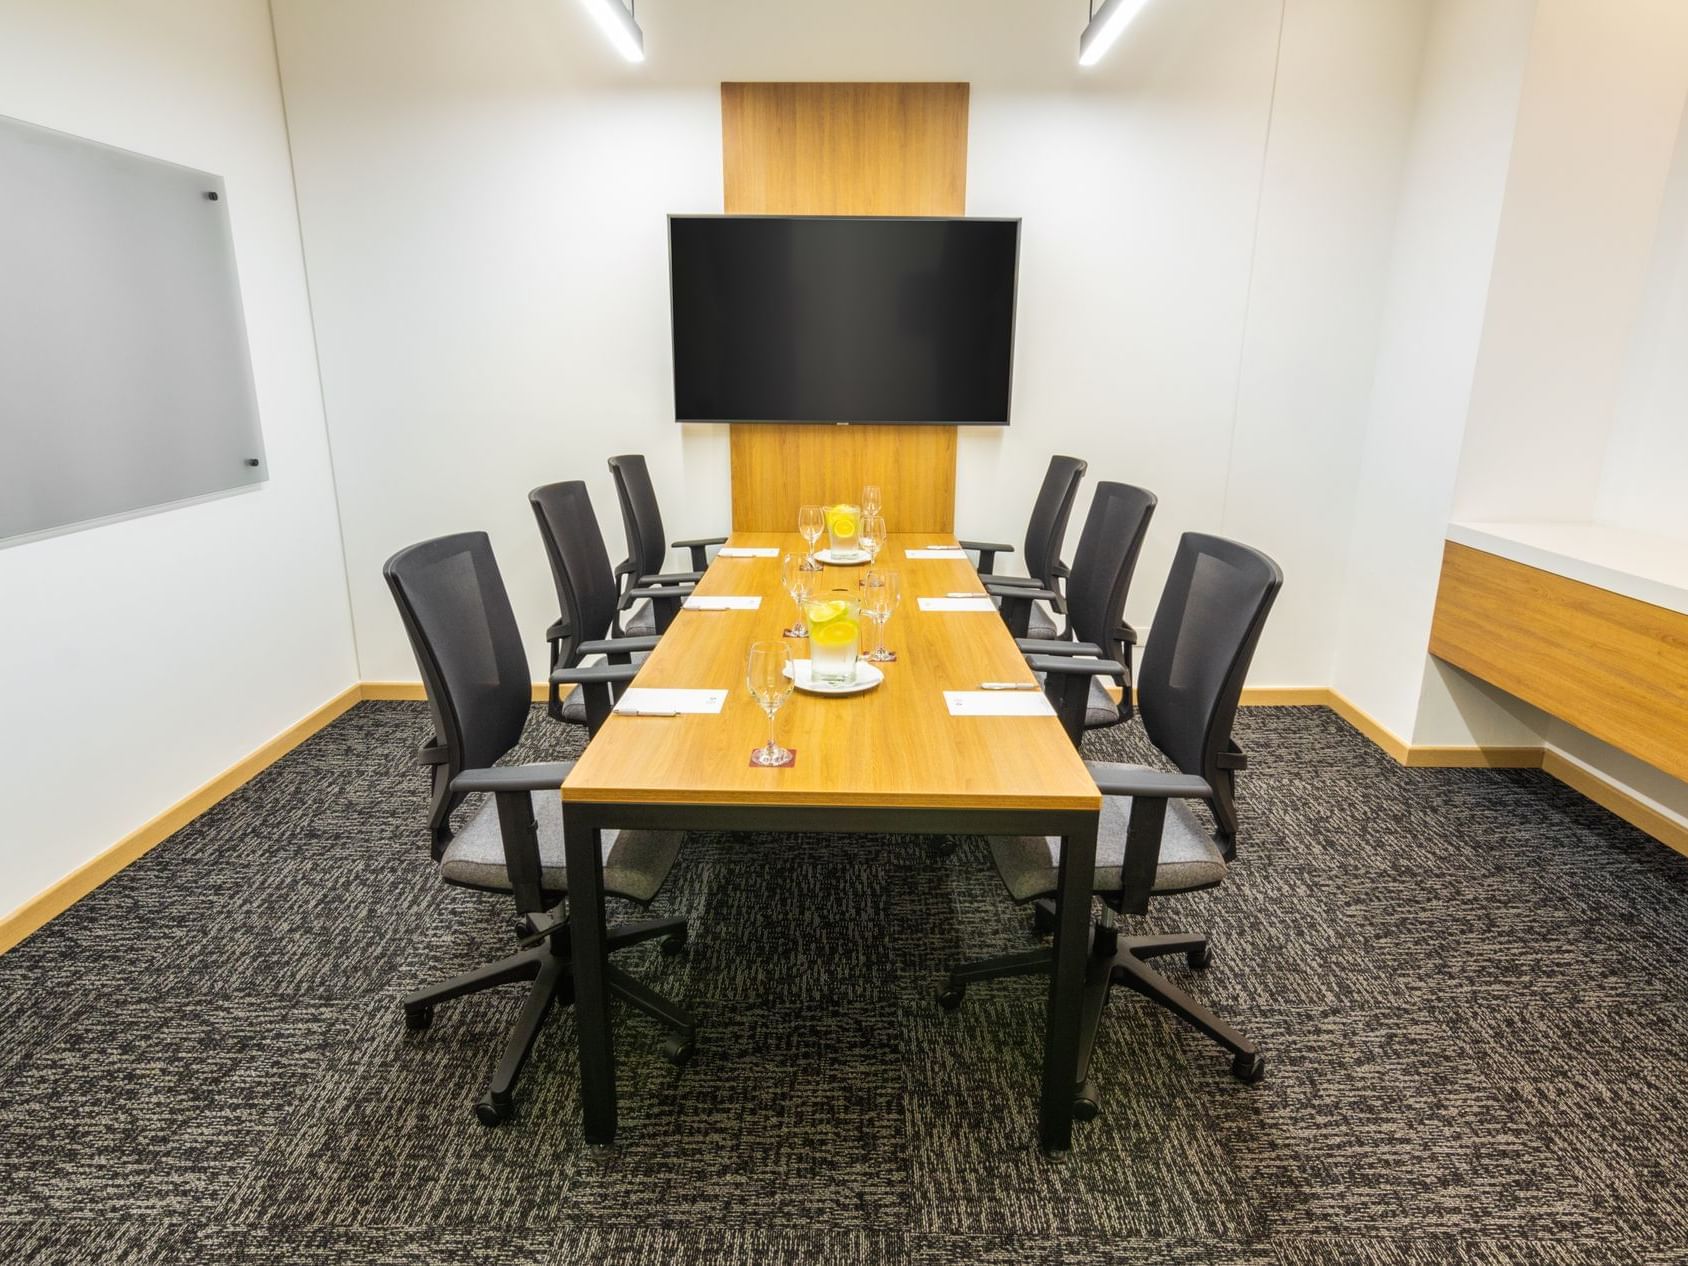 The arranged Nebraska meeting room with black chairs and a table